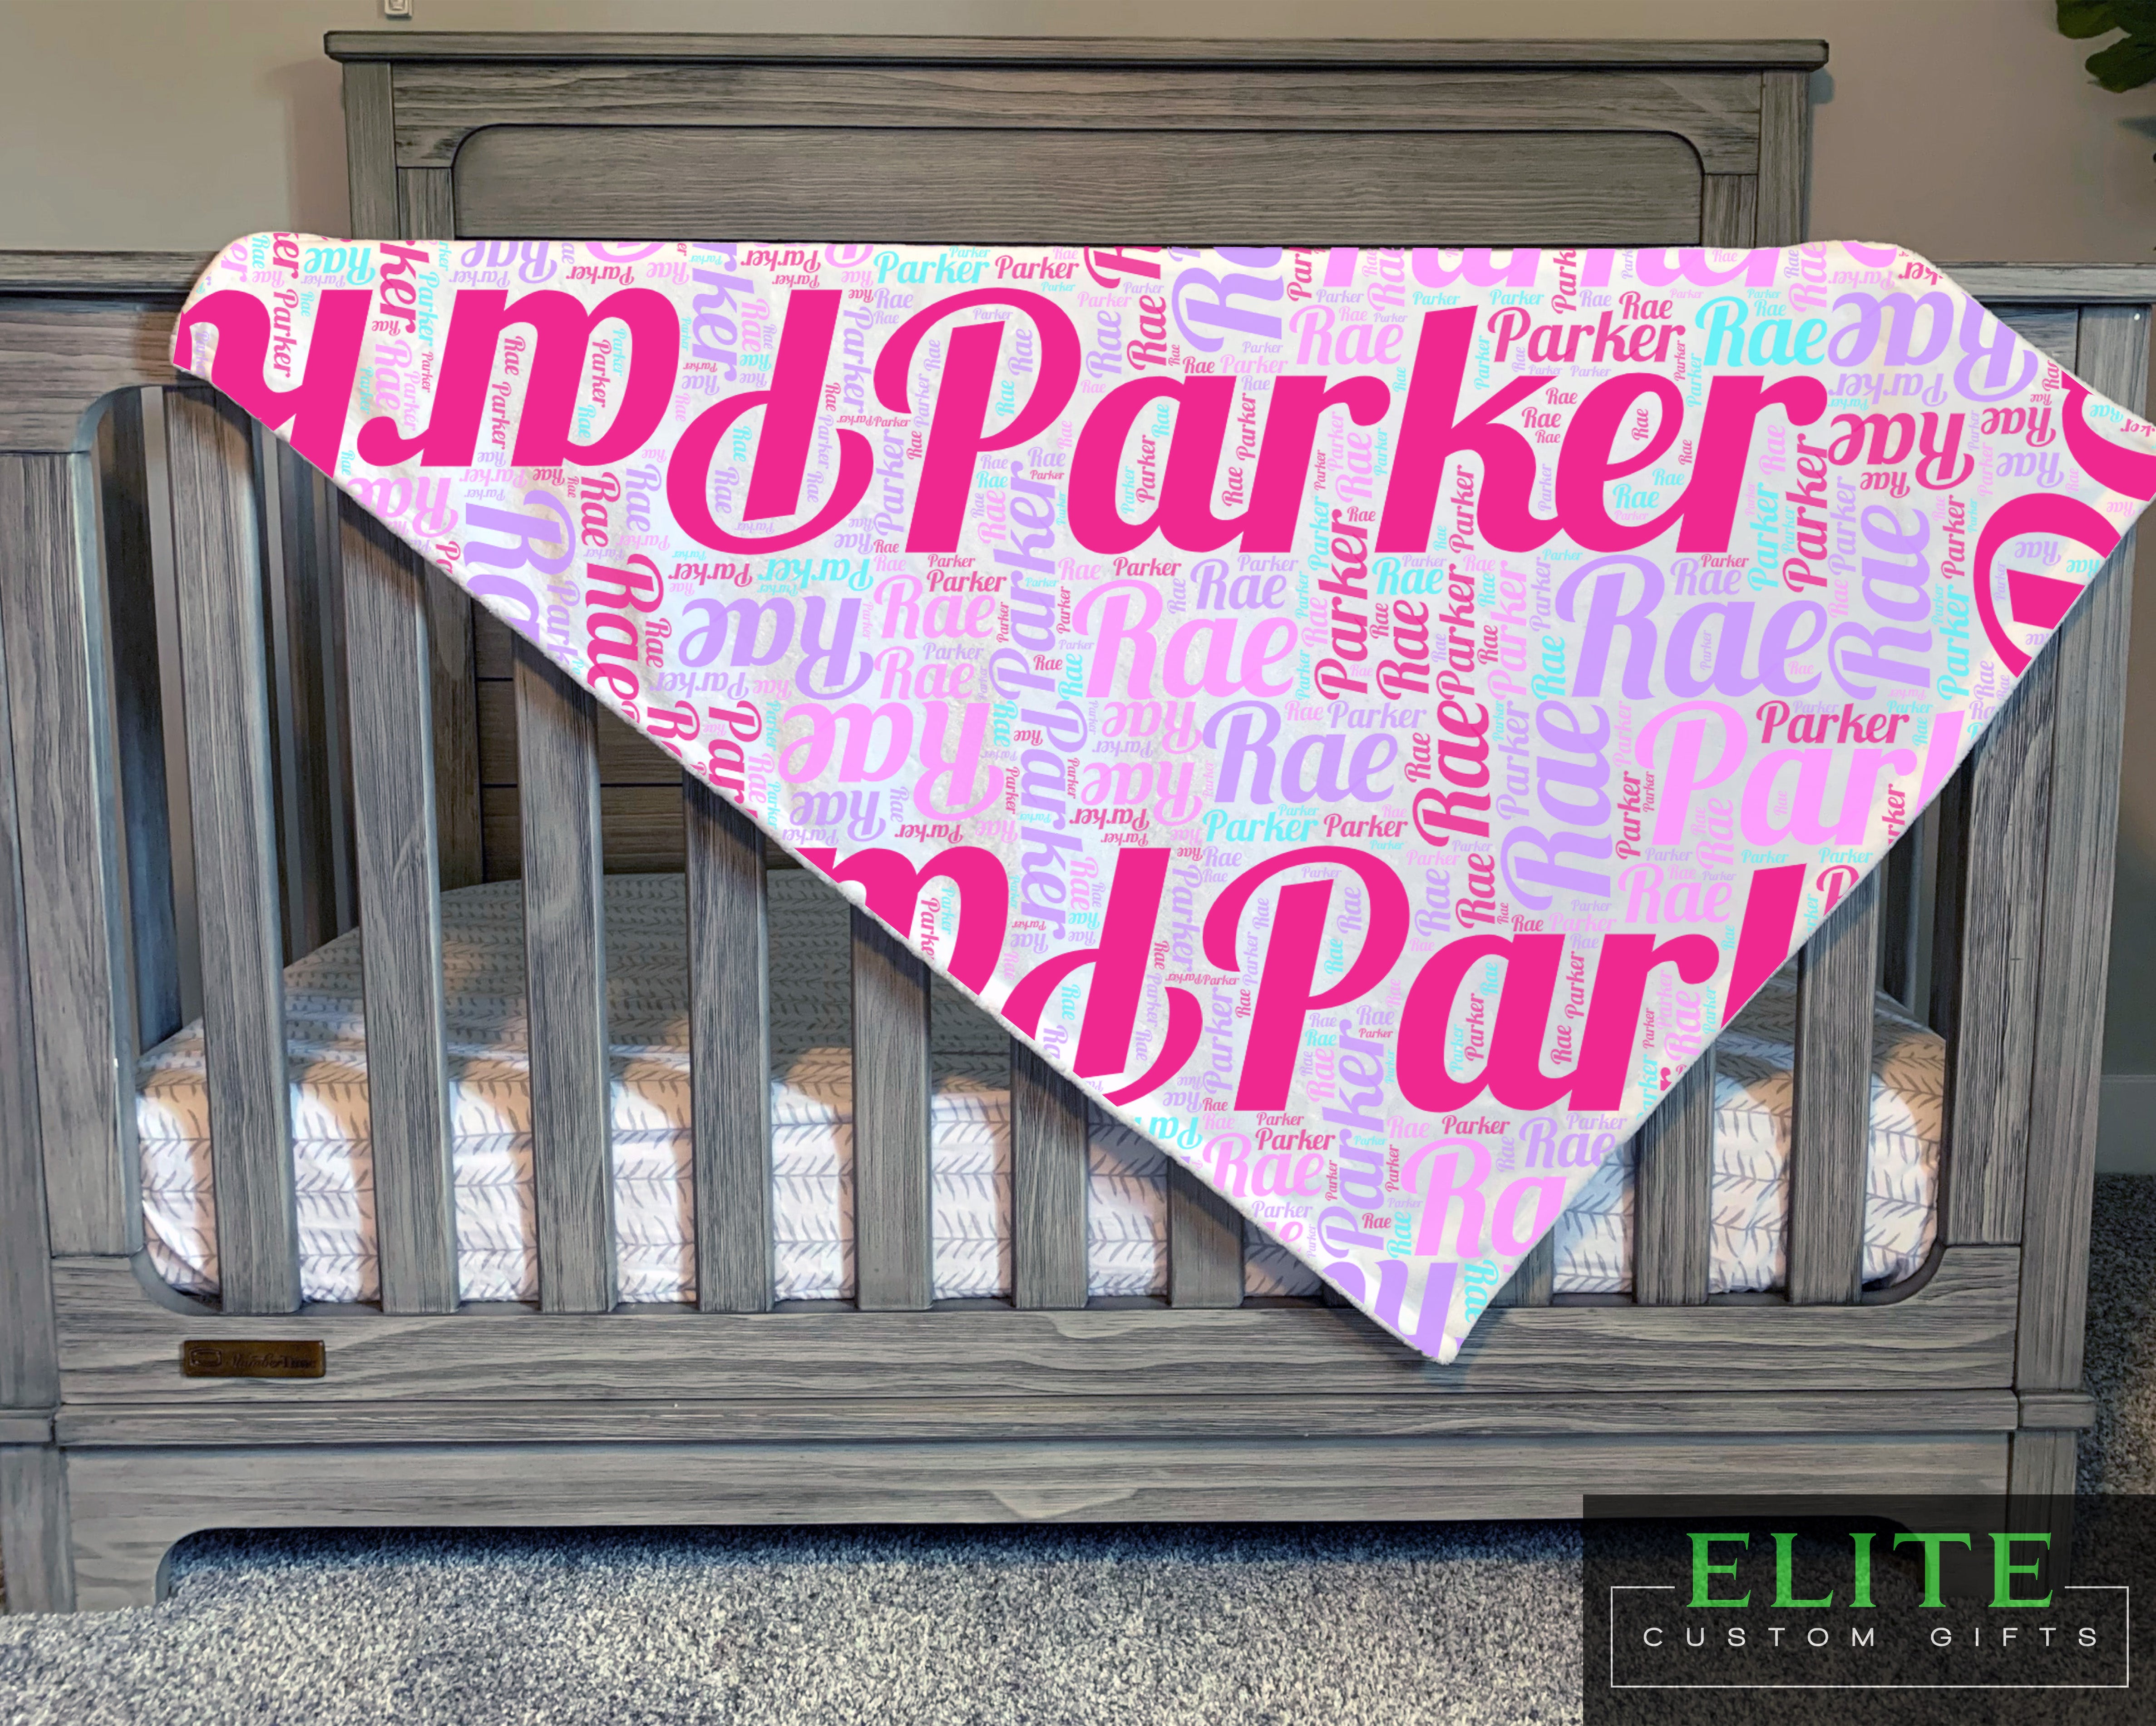 Personalized Baby Name Blanket